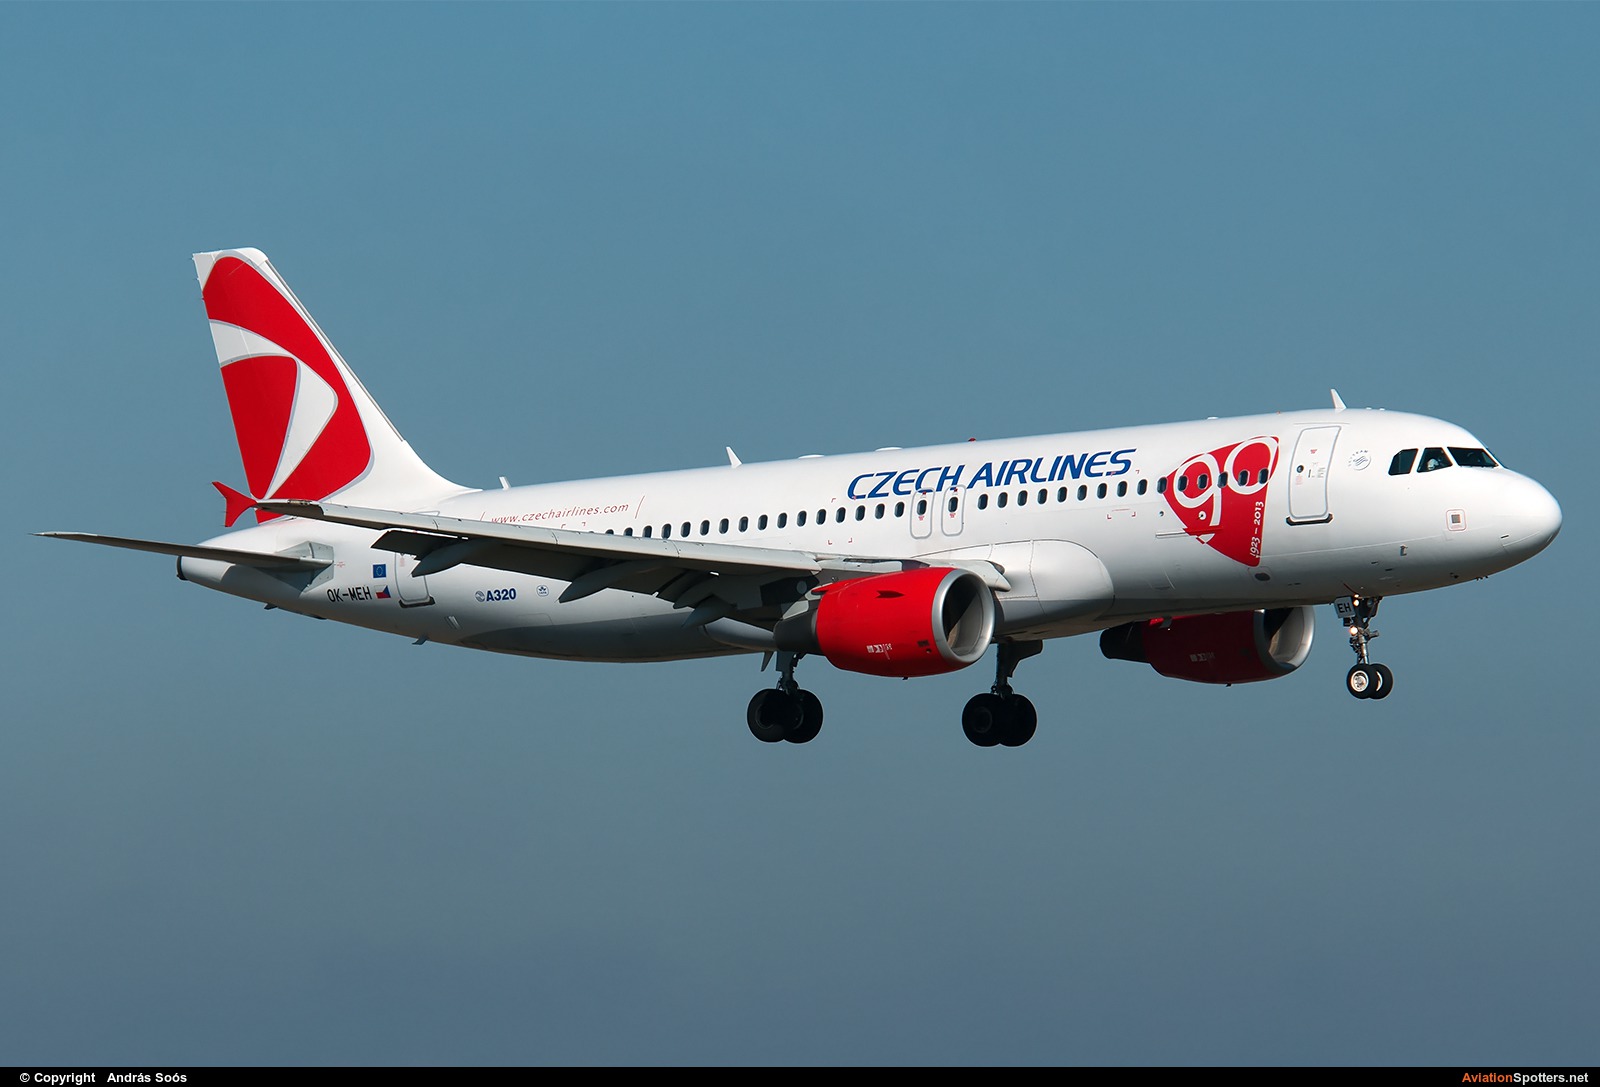 CSA - Czech Airlines  -  A320  (OK-MEH) By András Soós (sas1965)